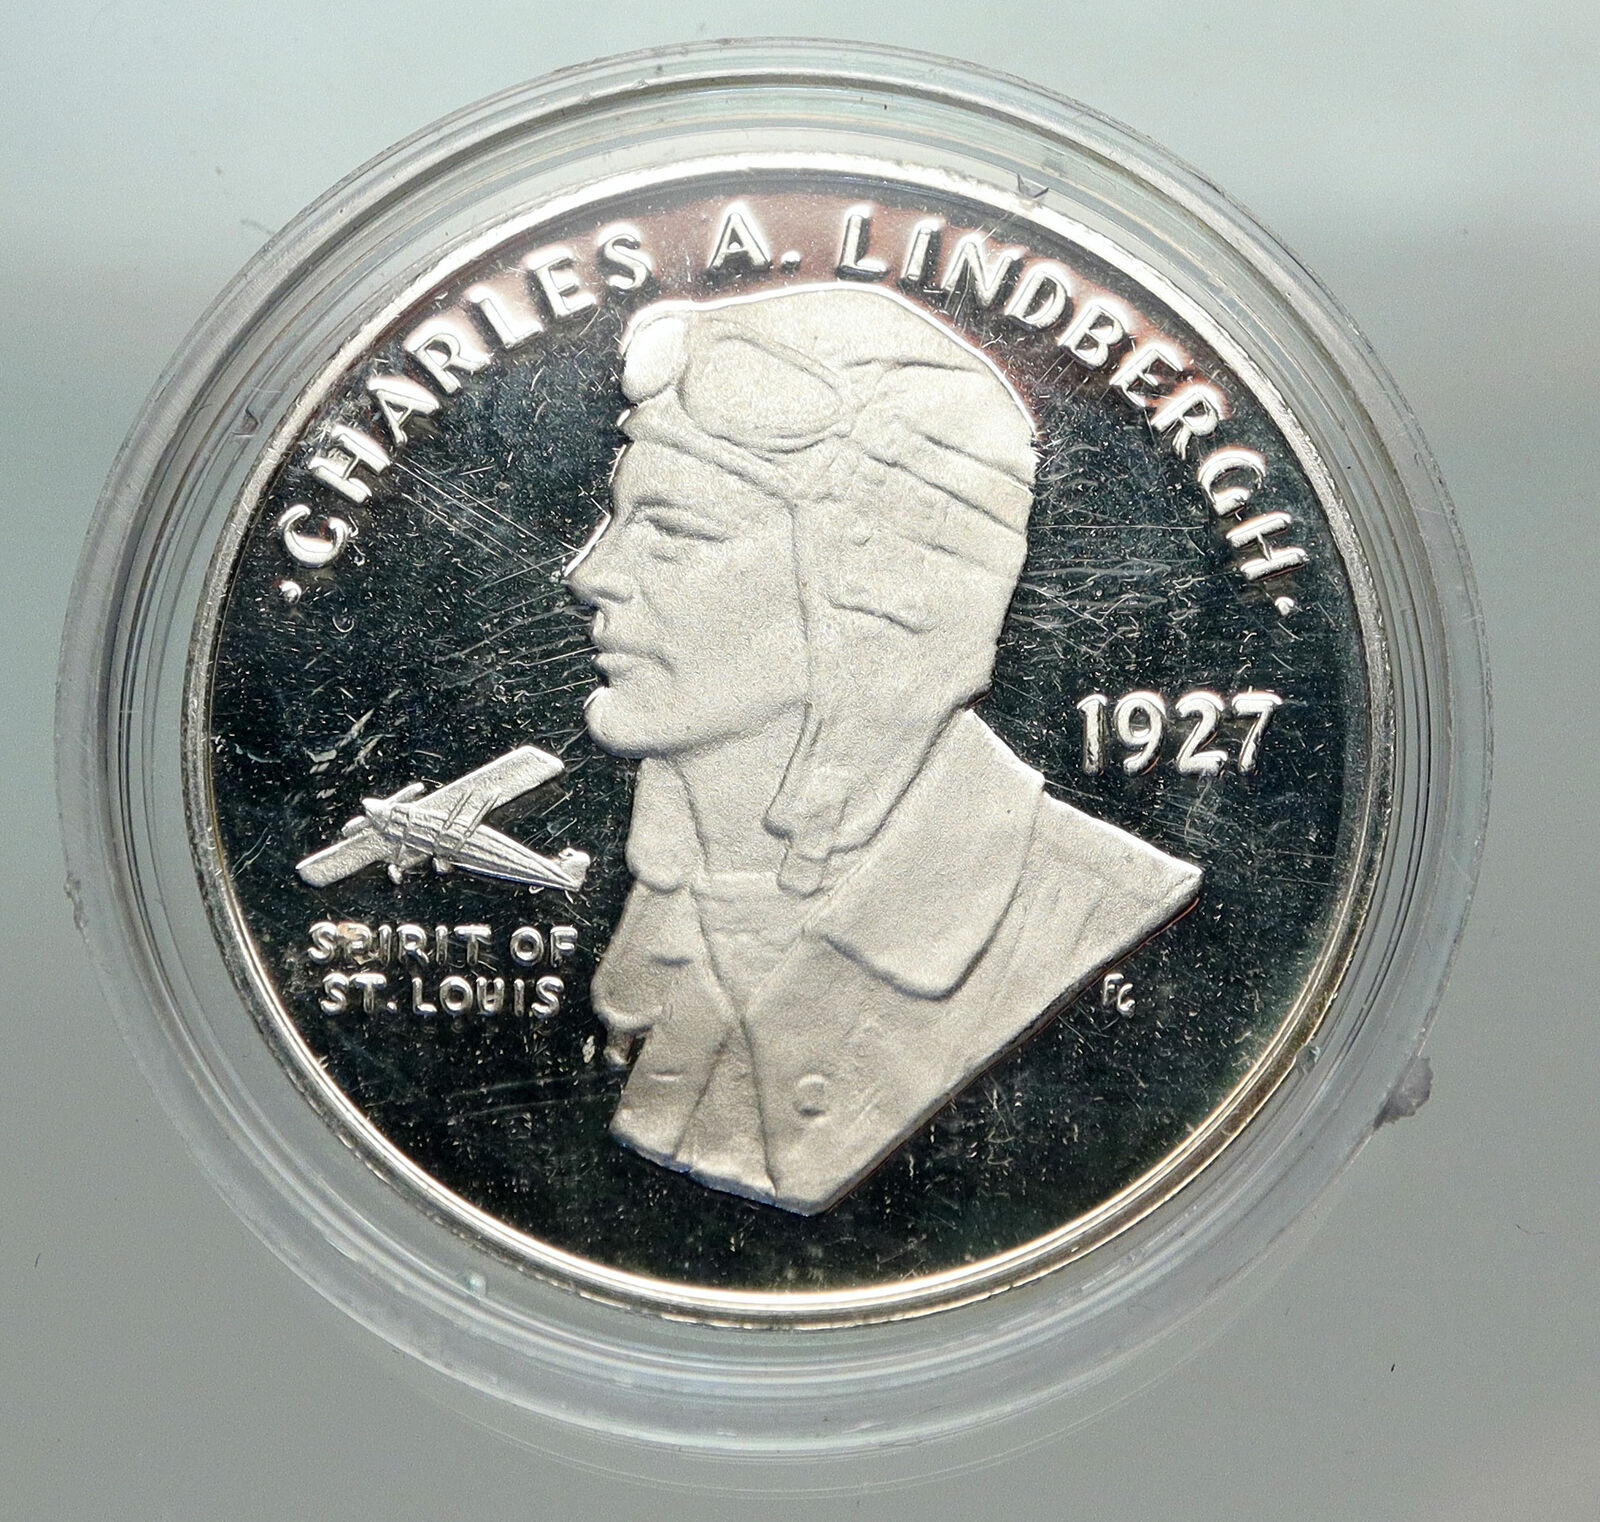 1986 UNITED STATES Charles Lindbergh FLIGHT Plane PROOF SILVER Medal Coin i85108